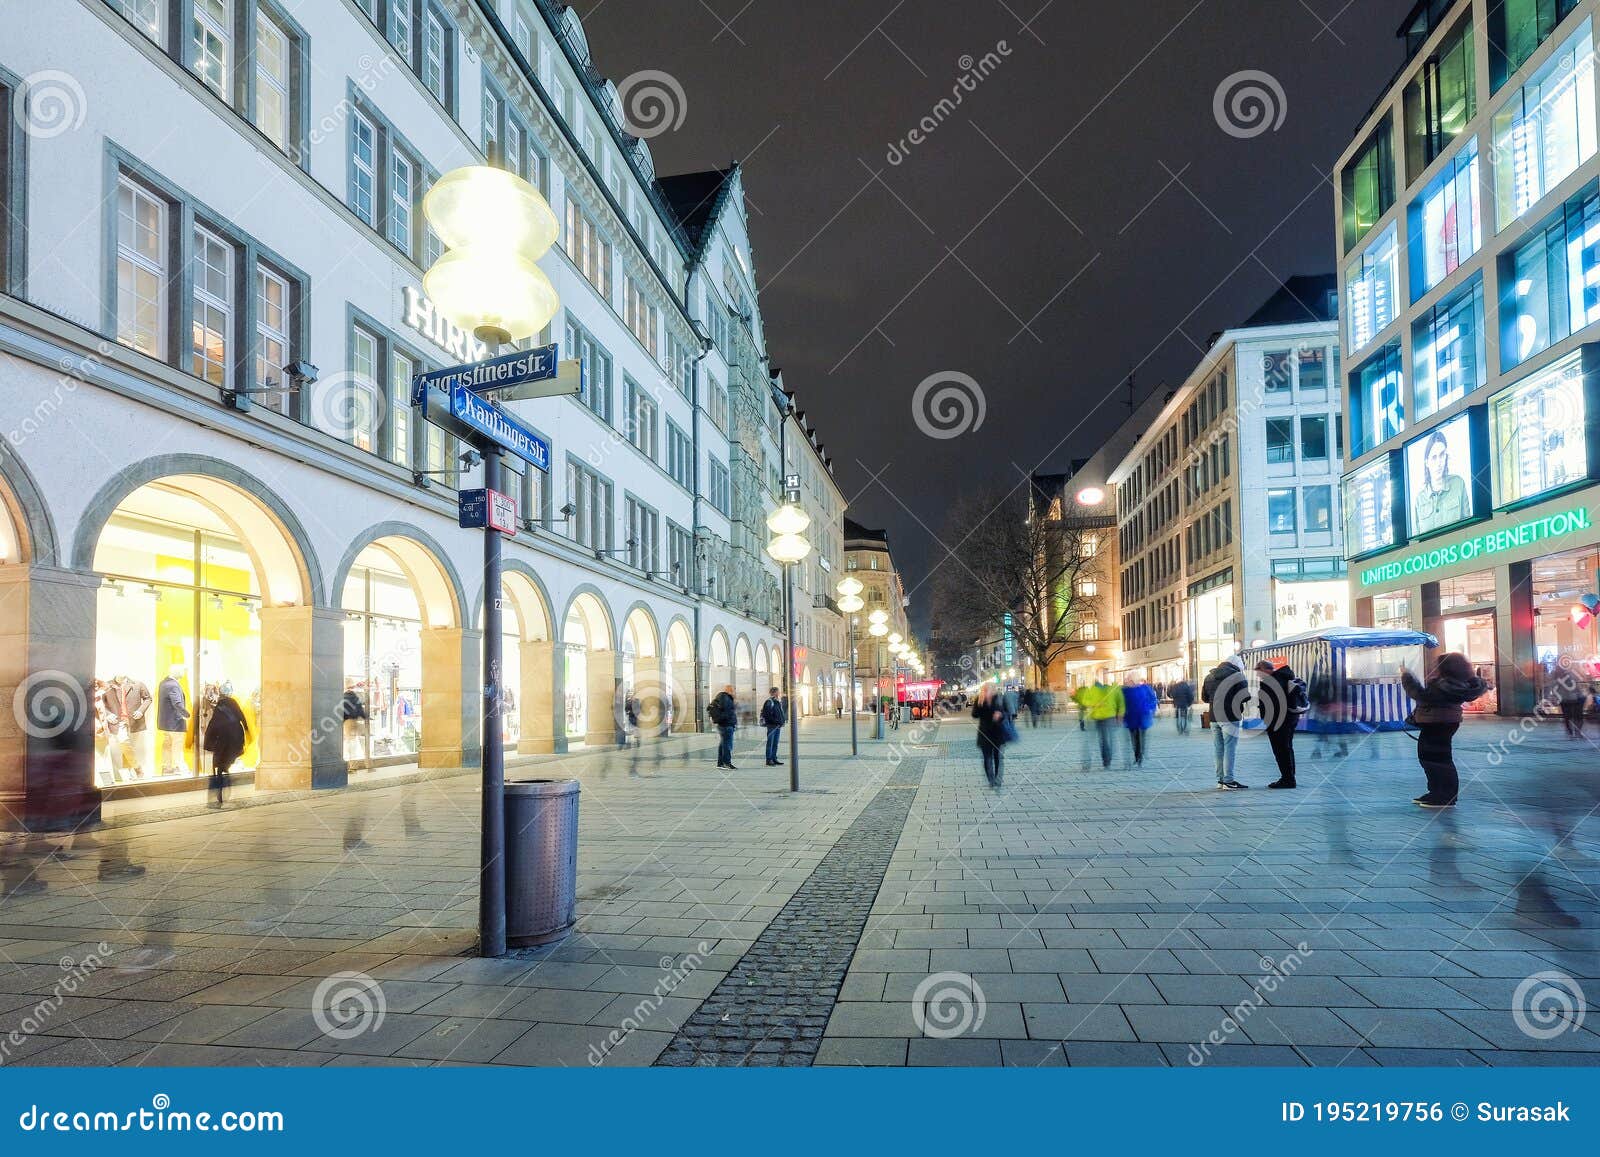 Street View Old Town Hall Near Marienplatz Town Square at Night in Munich, Germany Editorial Photo - Image of cityscape, 195219756